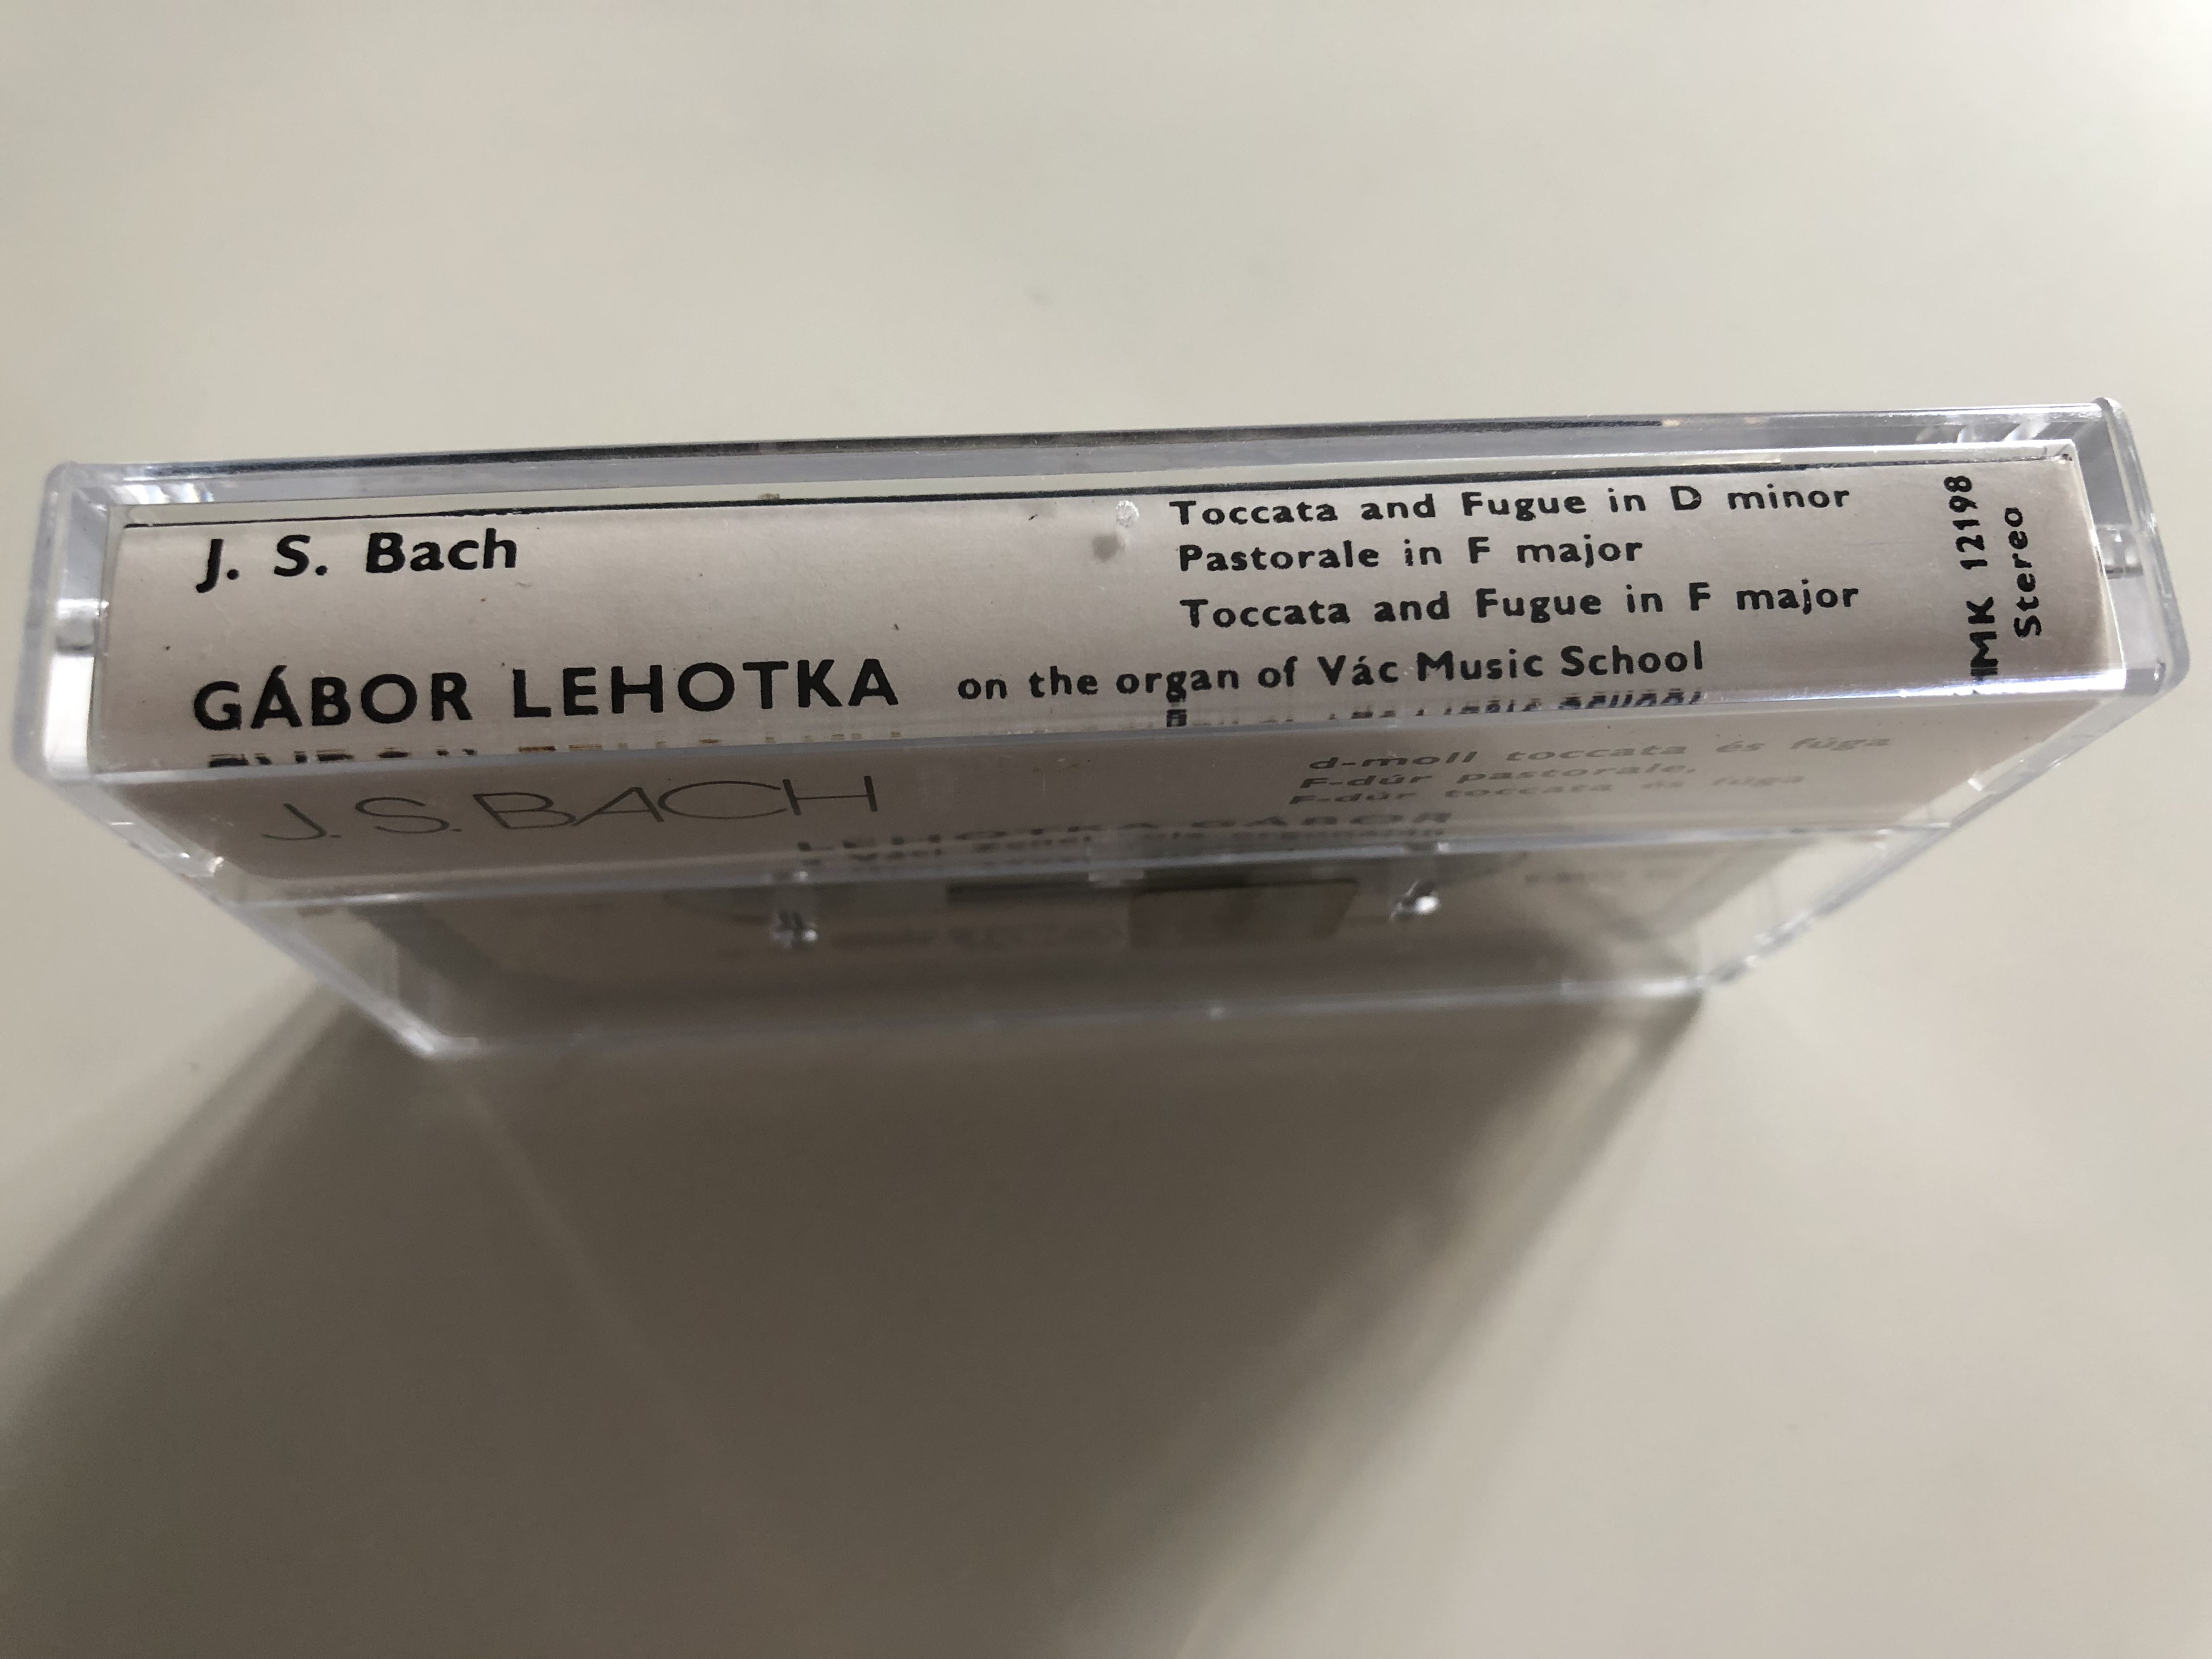 j.s.bach-toccata-and-fugue-in-d-minor-conducted-g-bor-lehotka-hungaroton-cassette-stereo-mk-12198-4-.jpg